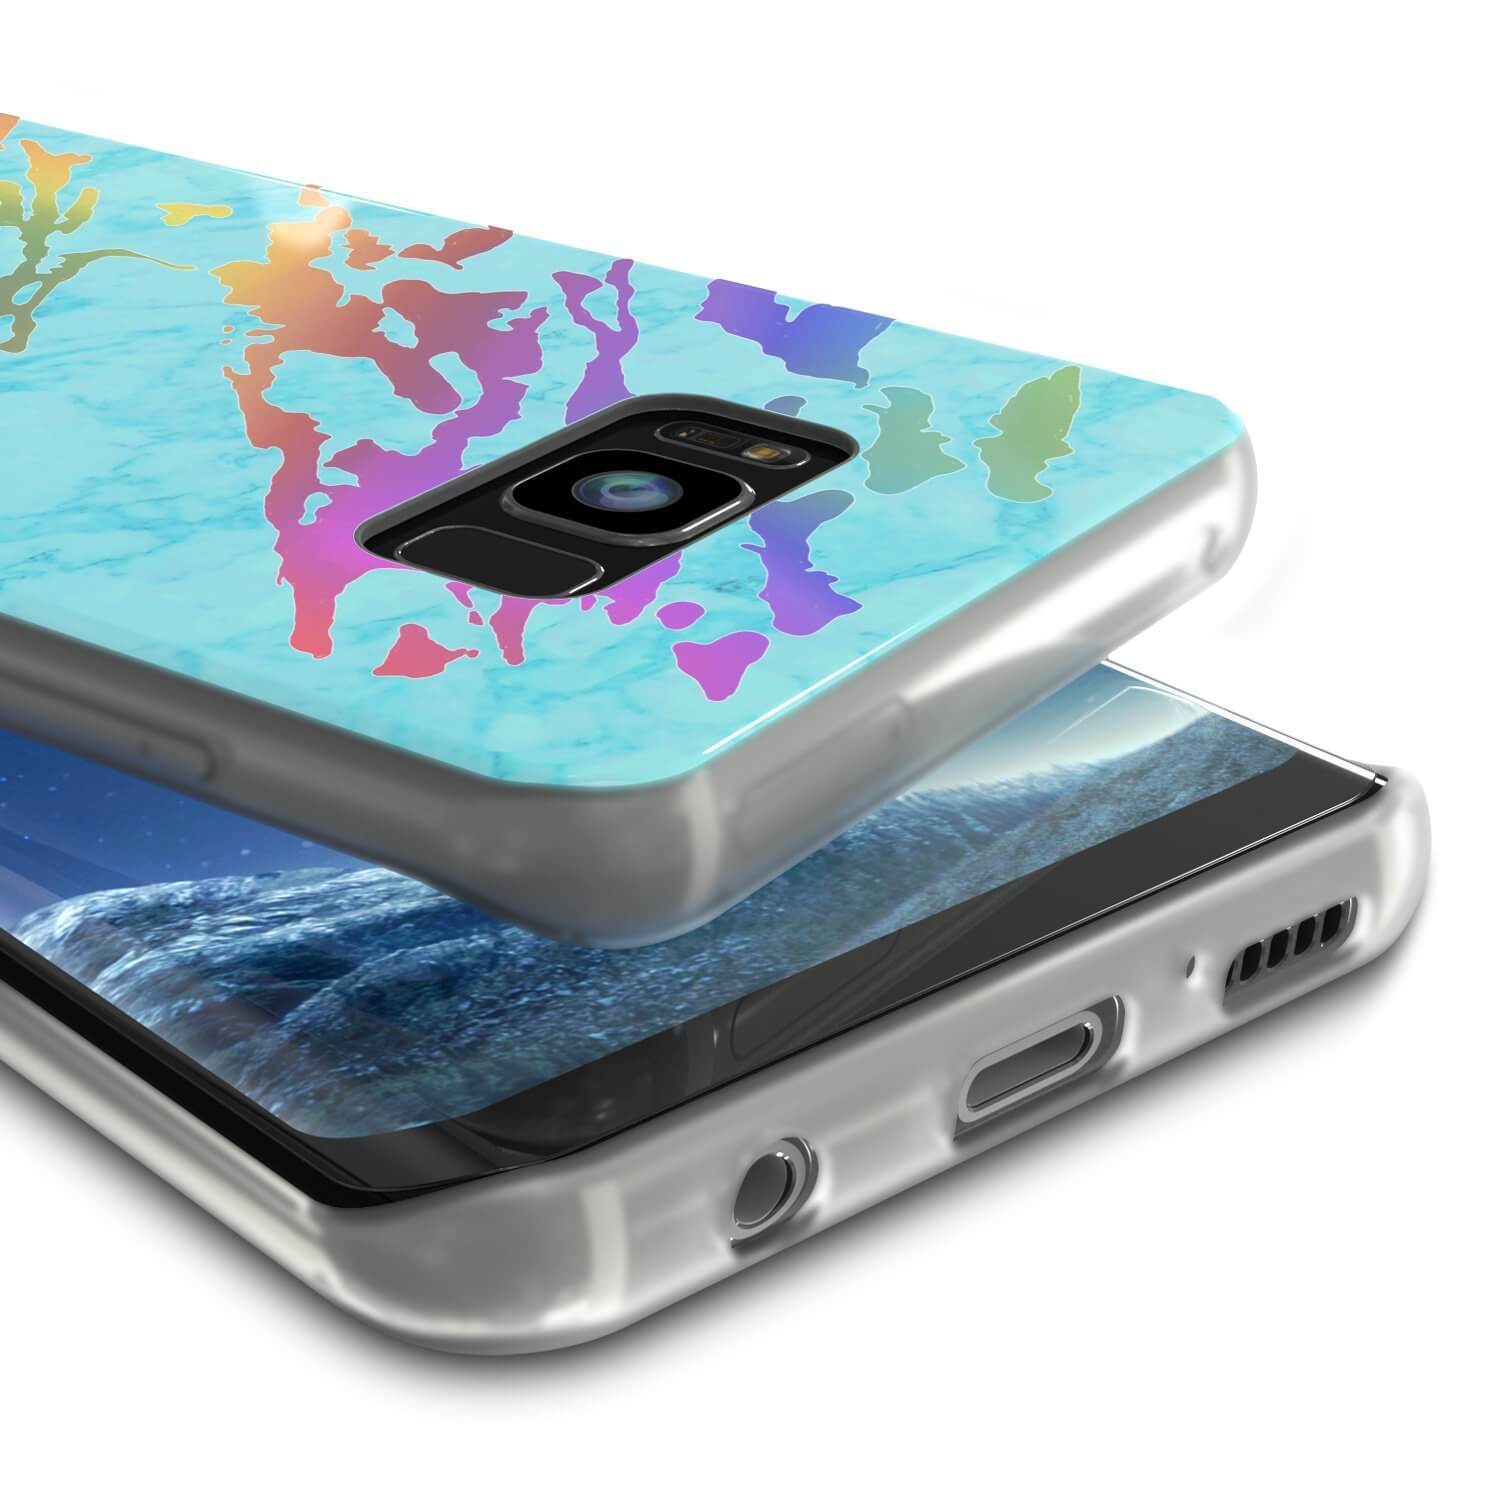 Punkcase Galaxy S8 Marble Case, Protective Full Body Cover W/PunkShield Screen Protector (Teal Onyx)